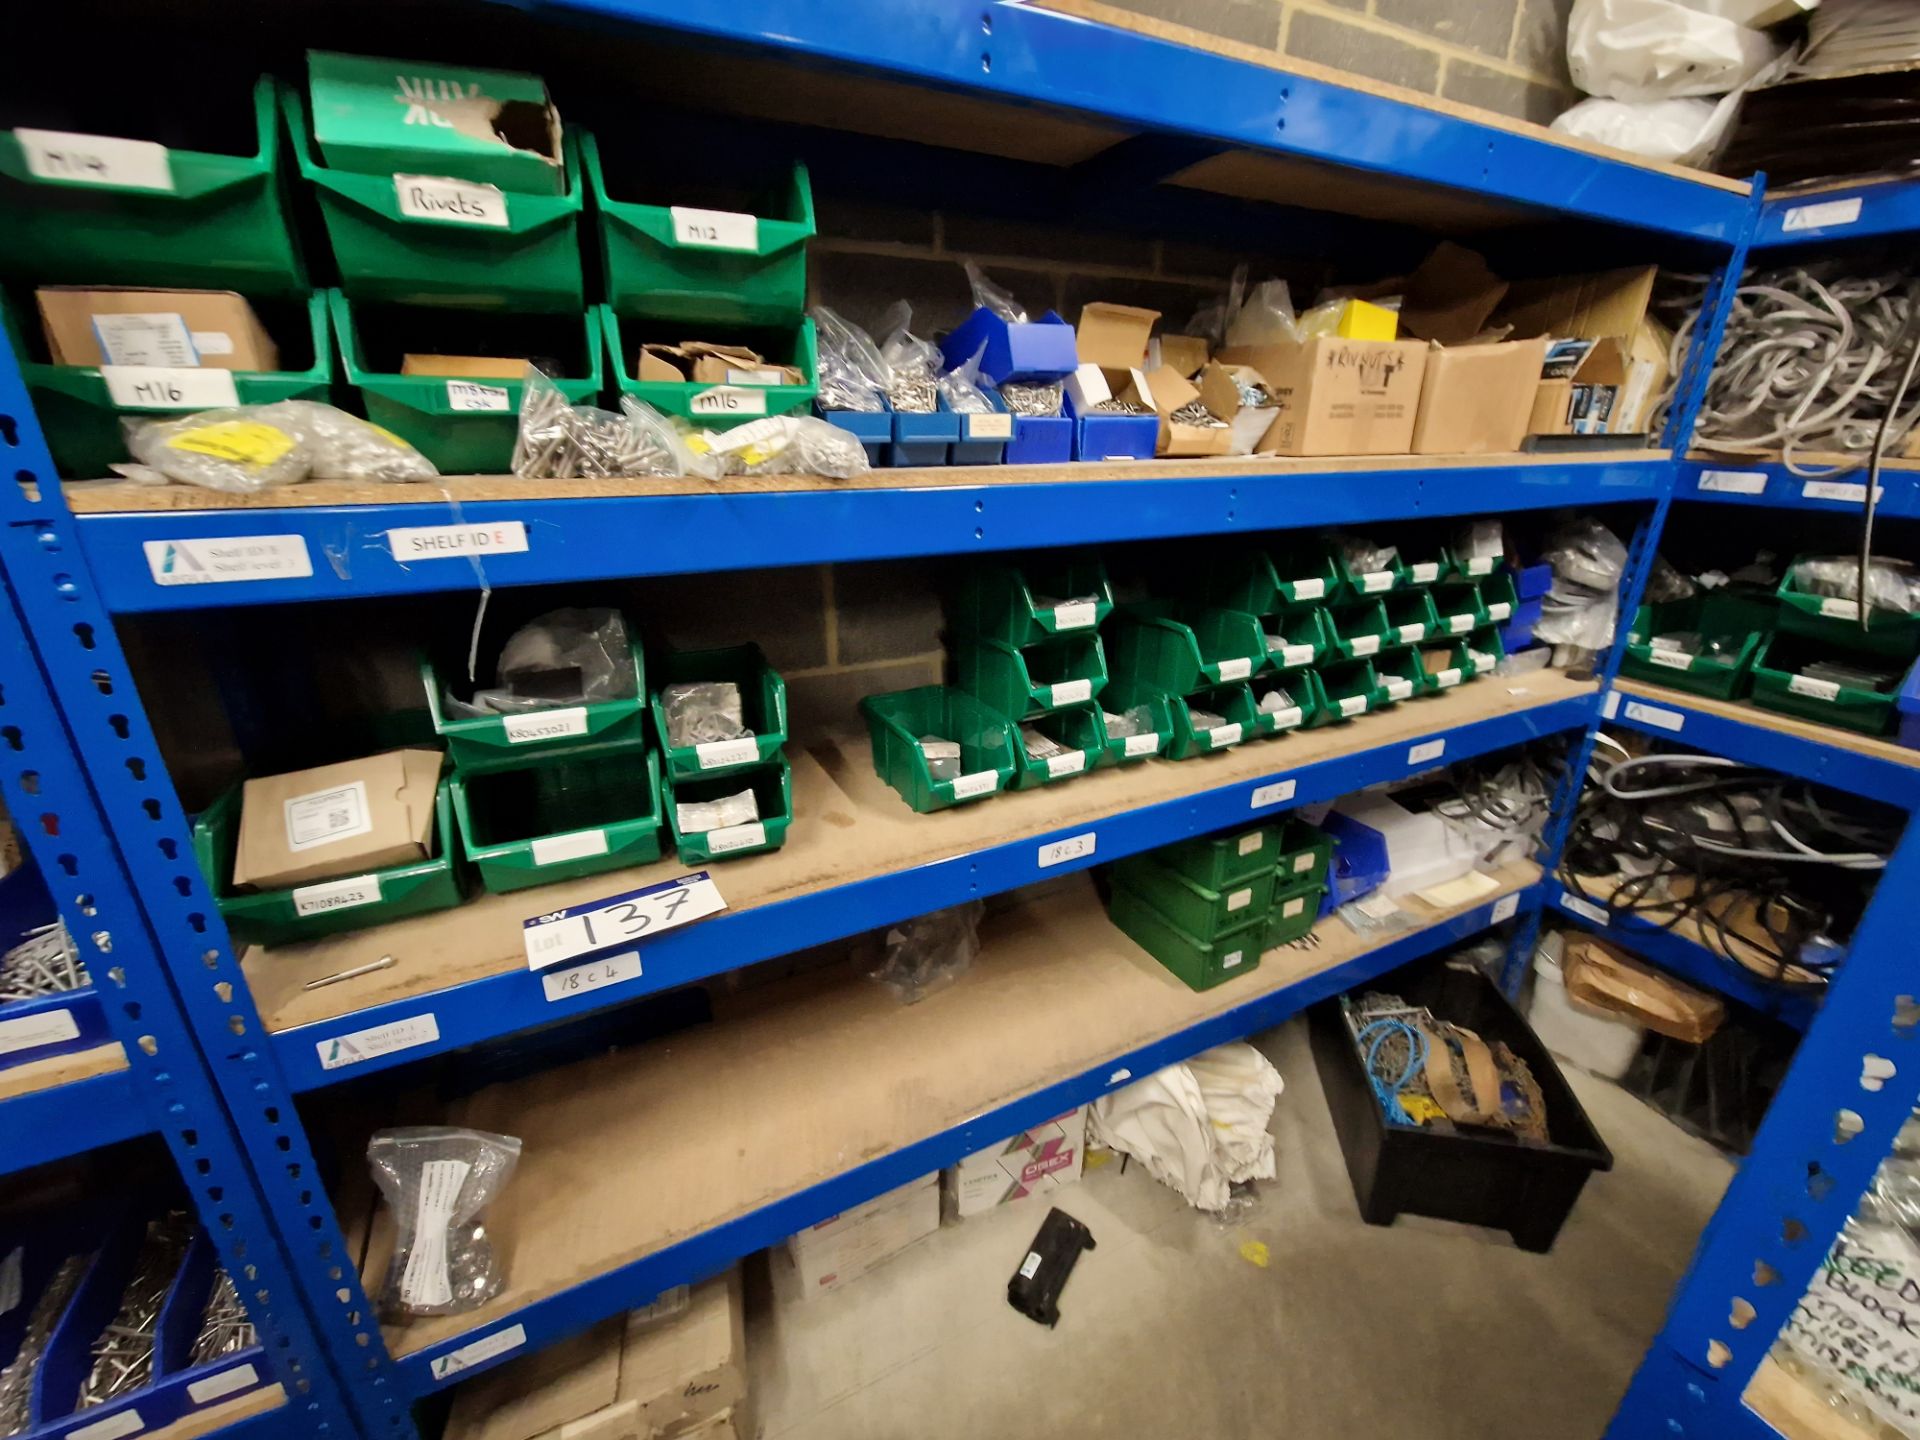 Contents to One Bay of Shelving, including Aluminium Profile, End Caps, Screws, Bolts, etc Please